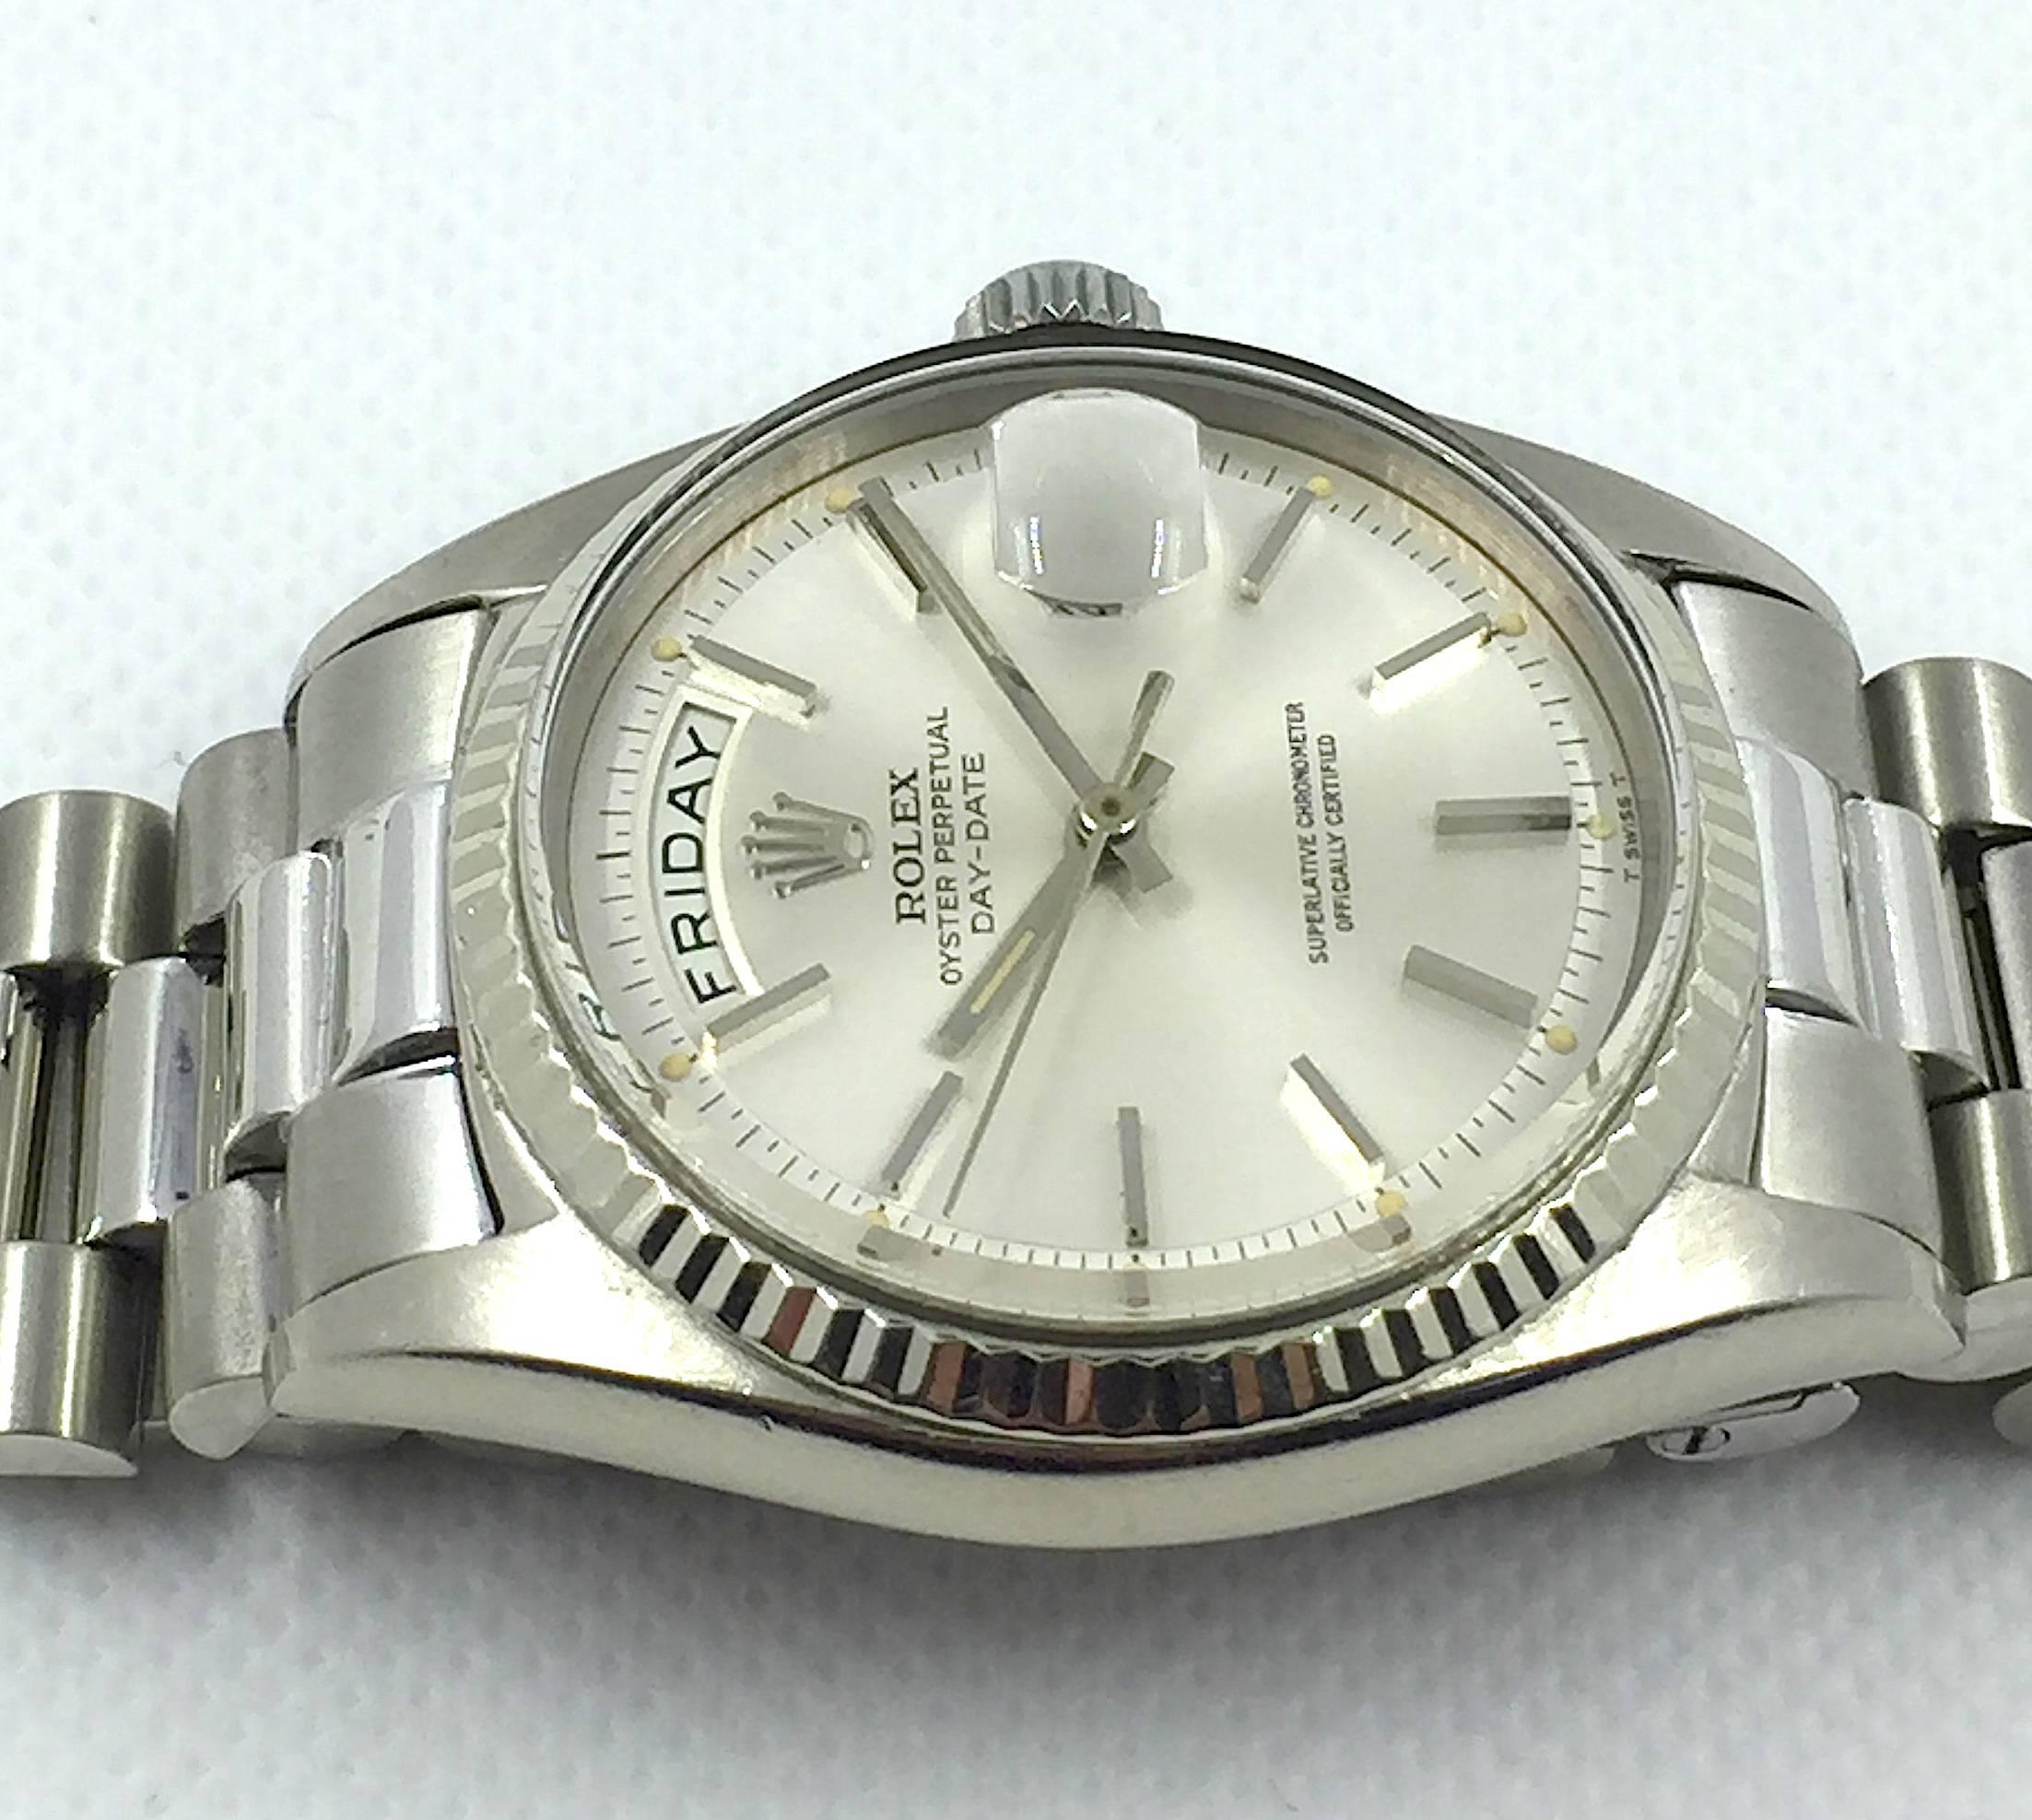 Rolex 18K White Gold Oyster Perepetual Day-Date Presidential Wristwatch
Factory Silvered Pie-Pan Dial with Applied Hour Markers
18K White Gold Fluted Bezel
36mm in size 
Rolex Calibre Base 1500 Automatic Movement
Acrylic Crystal
Late 1960's